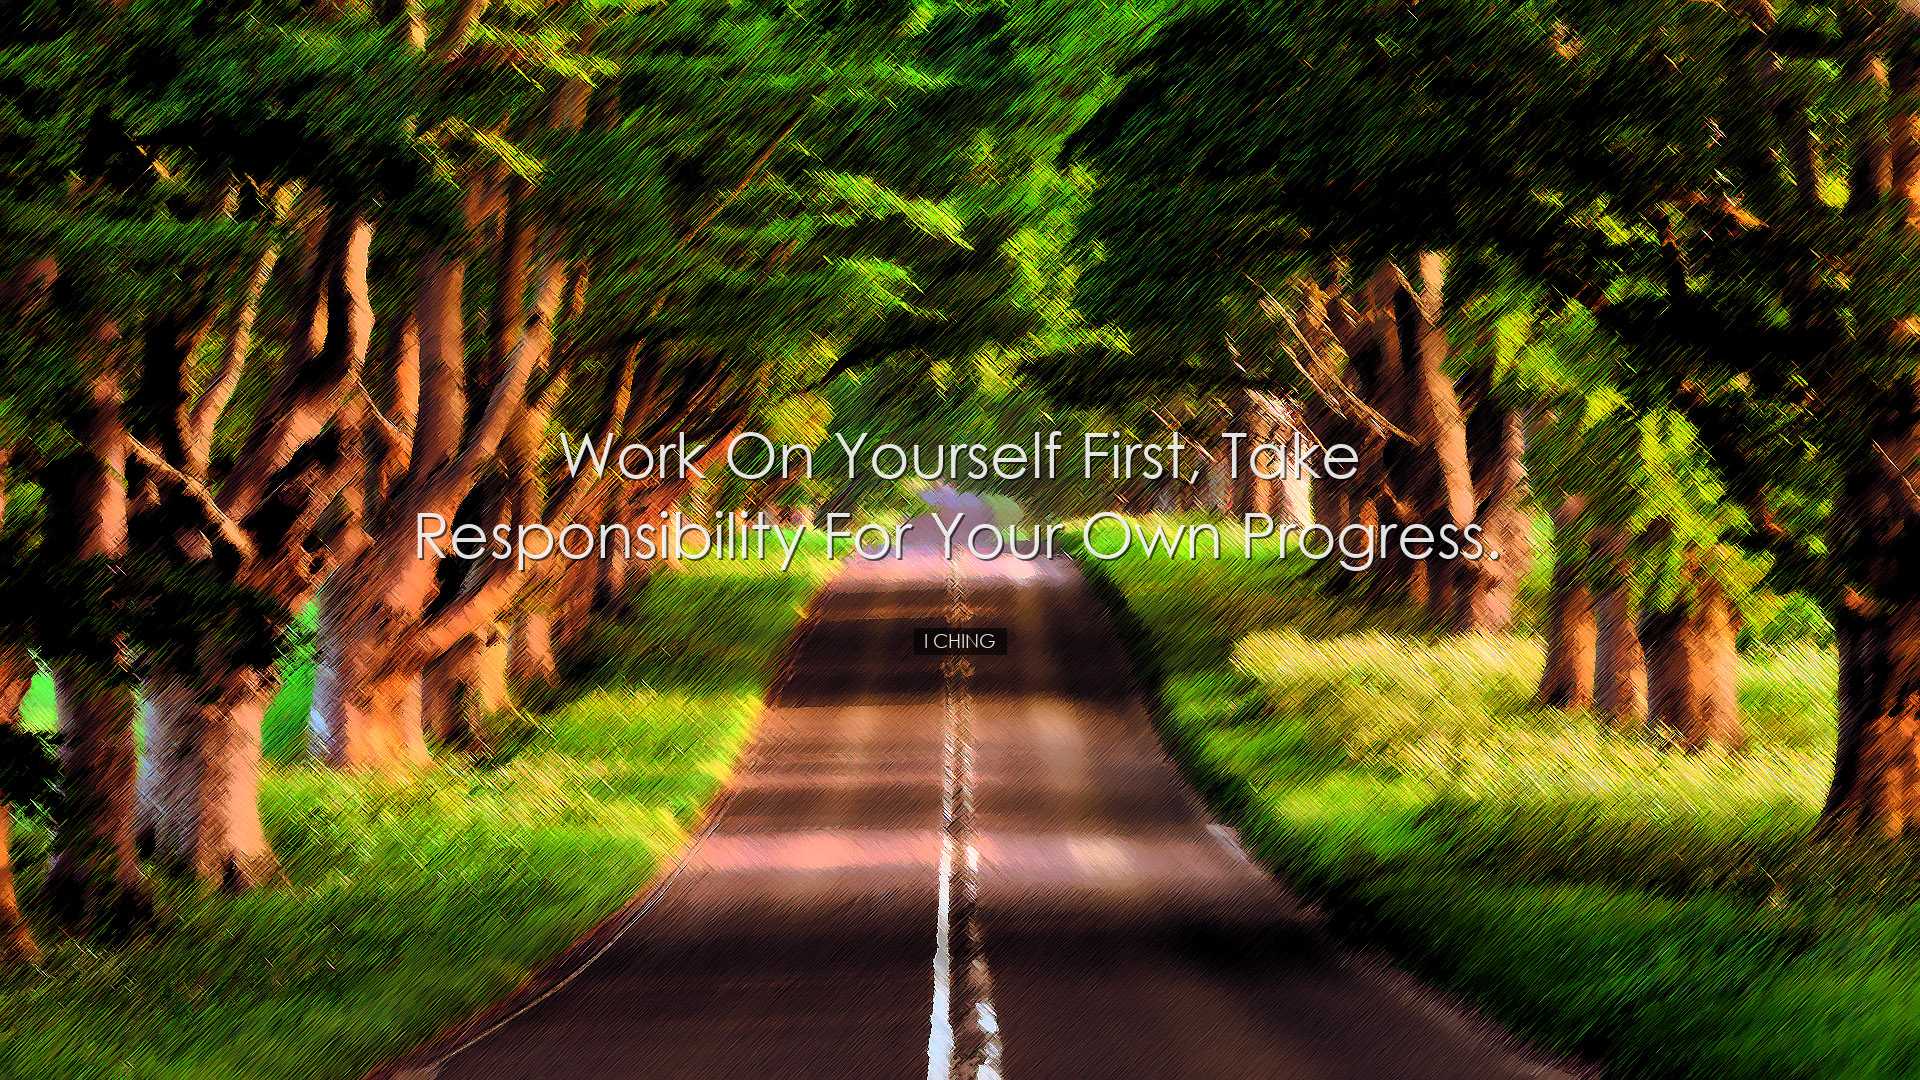 Work on yourself first, take responsibility for your own progress.